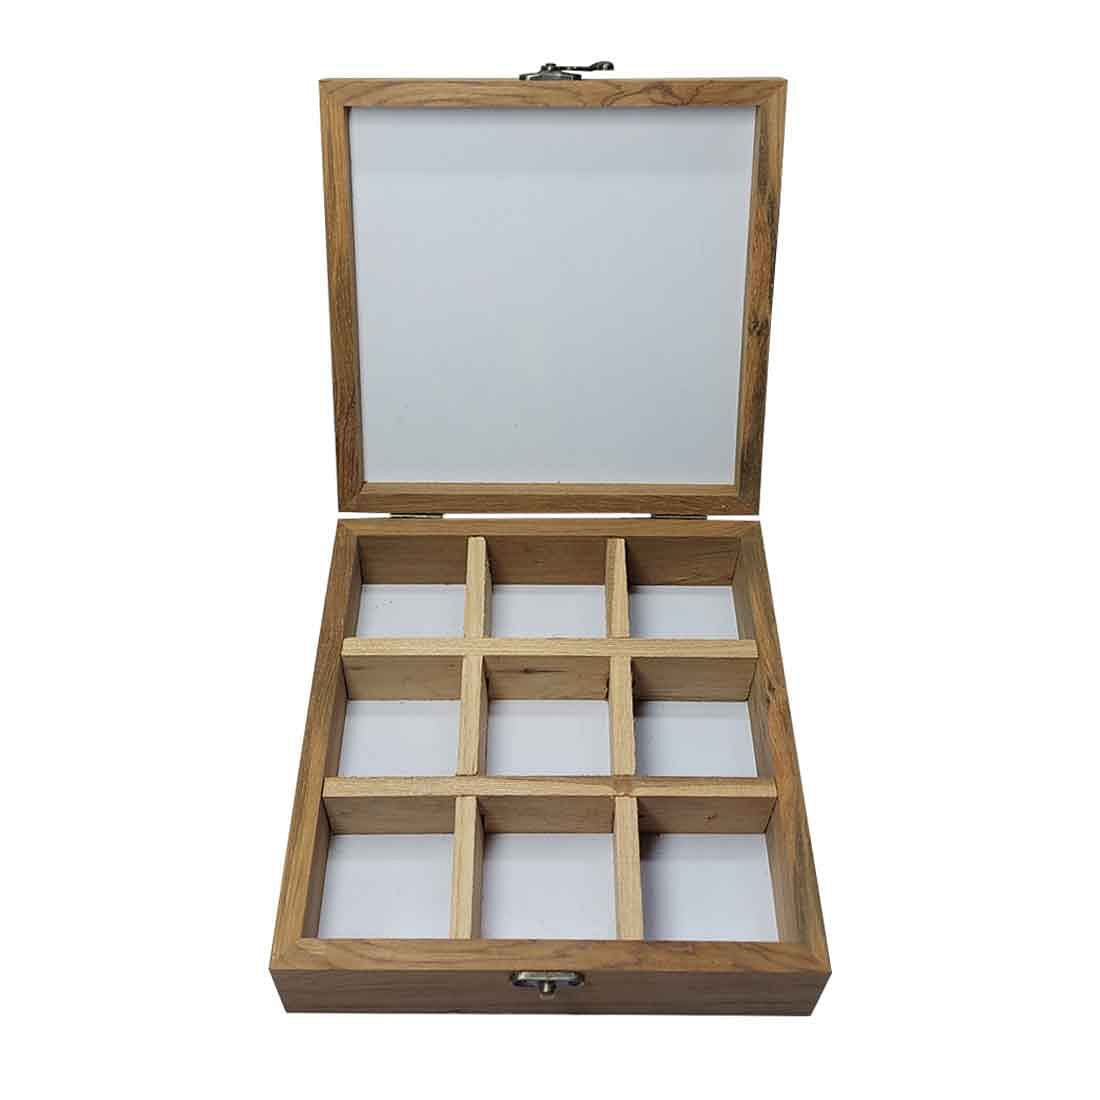 Nutcase Jewellery Organisers Storage Box - Unique Gifts -Shades For Spring Nutcase